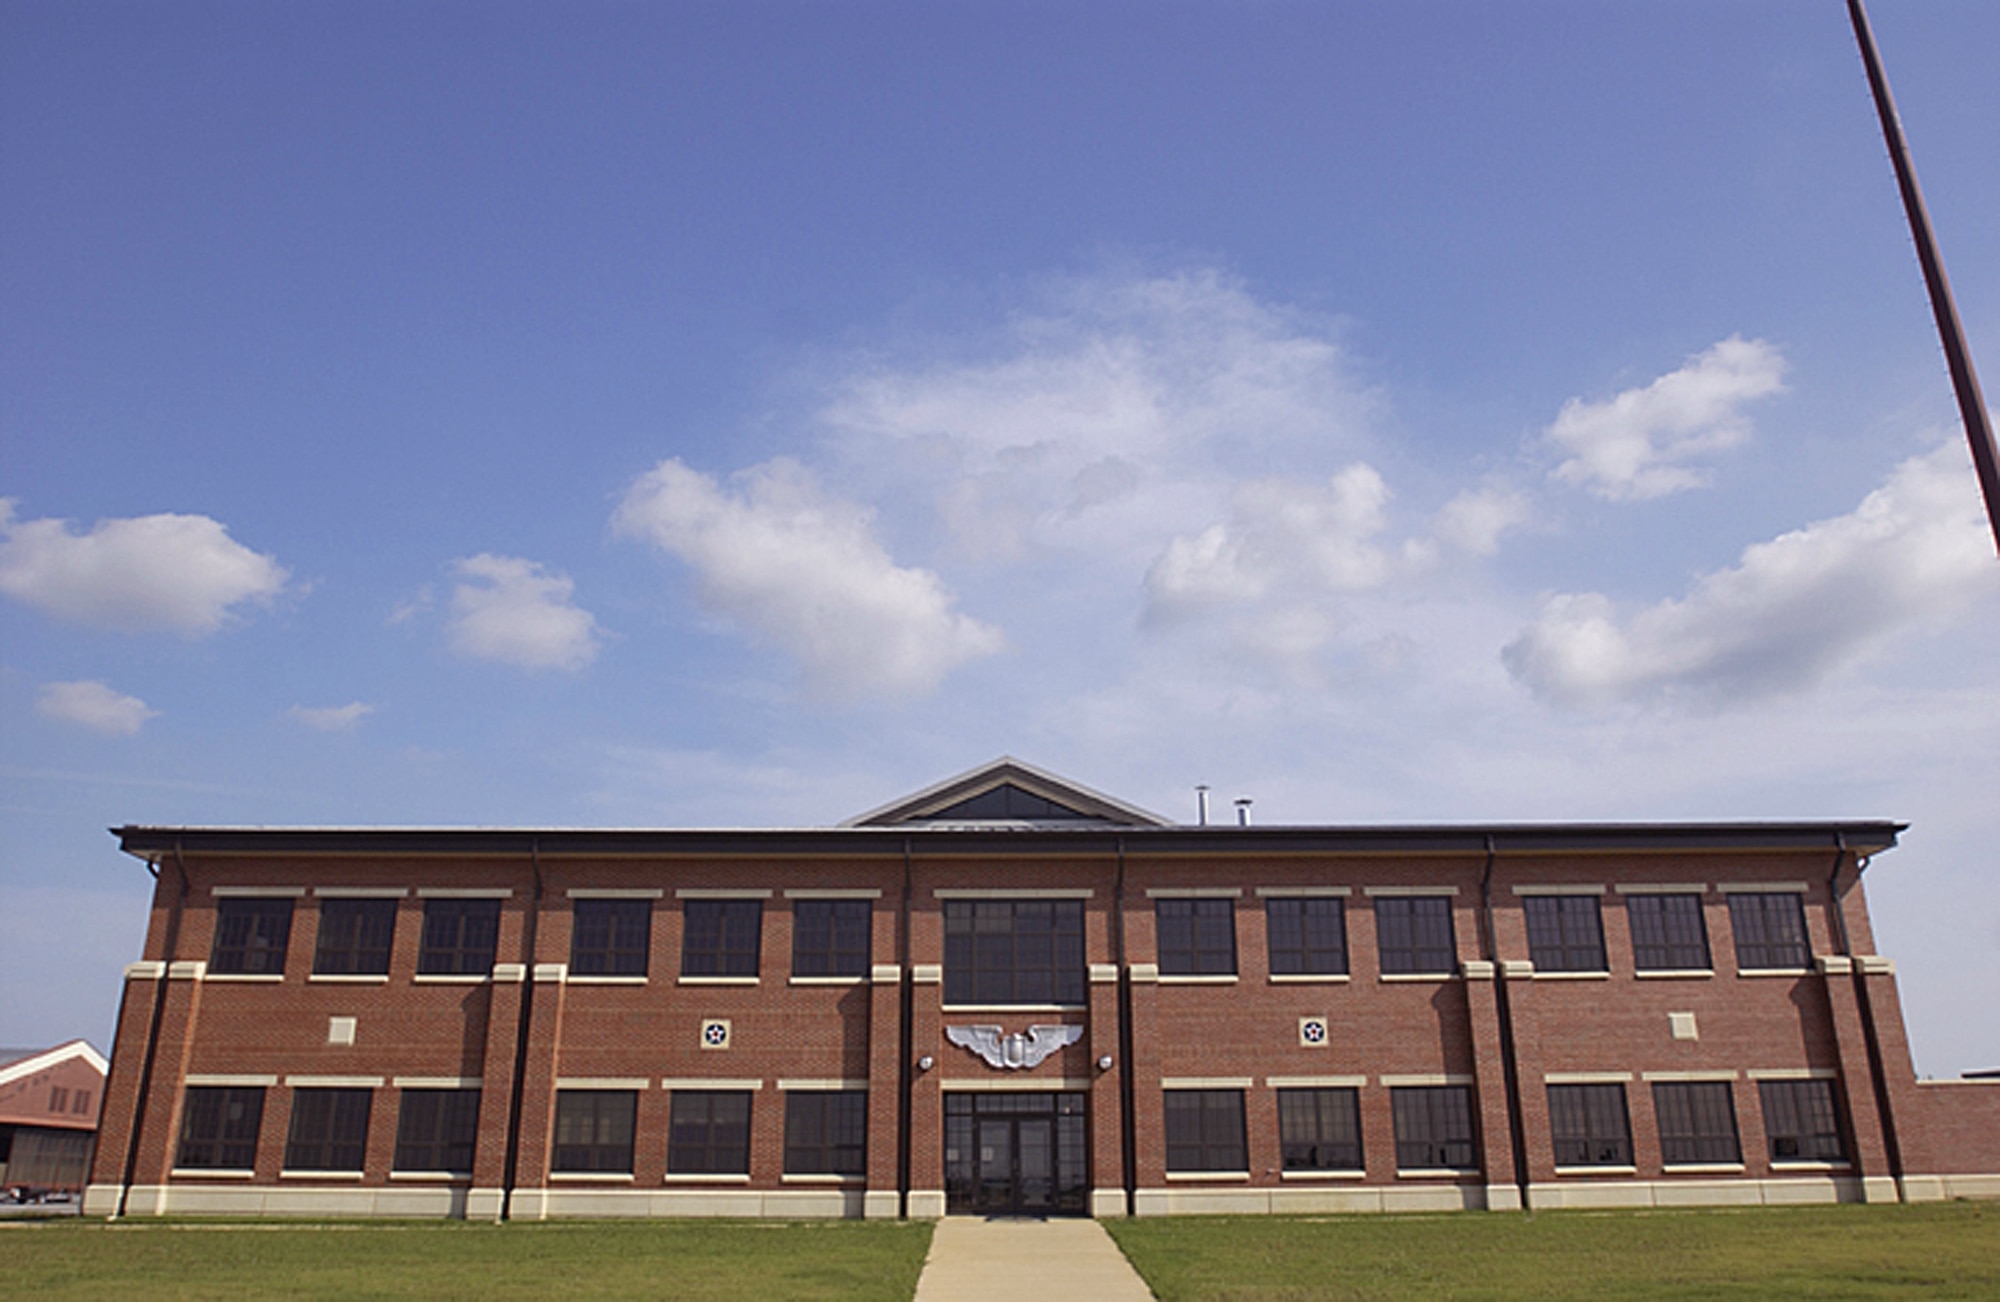 LANGLEY AIR FORCE BASE, Va. -- The exterior of a new building here reflects the architecture of the early 1920s.  (U.S Air Force photo by Staff Sgt. Eric T. Sheler) 